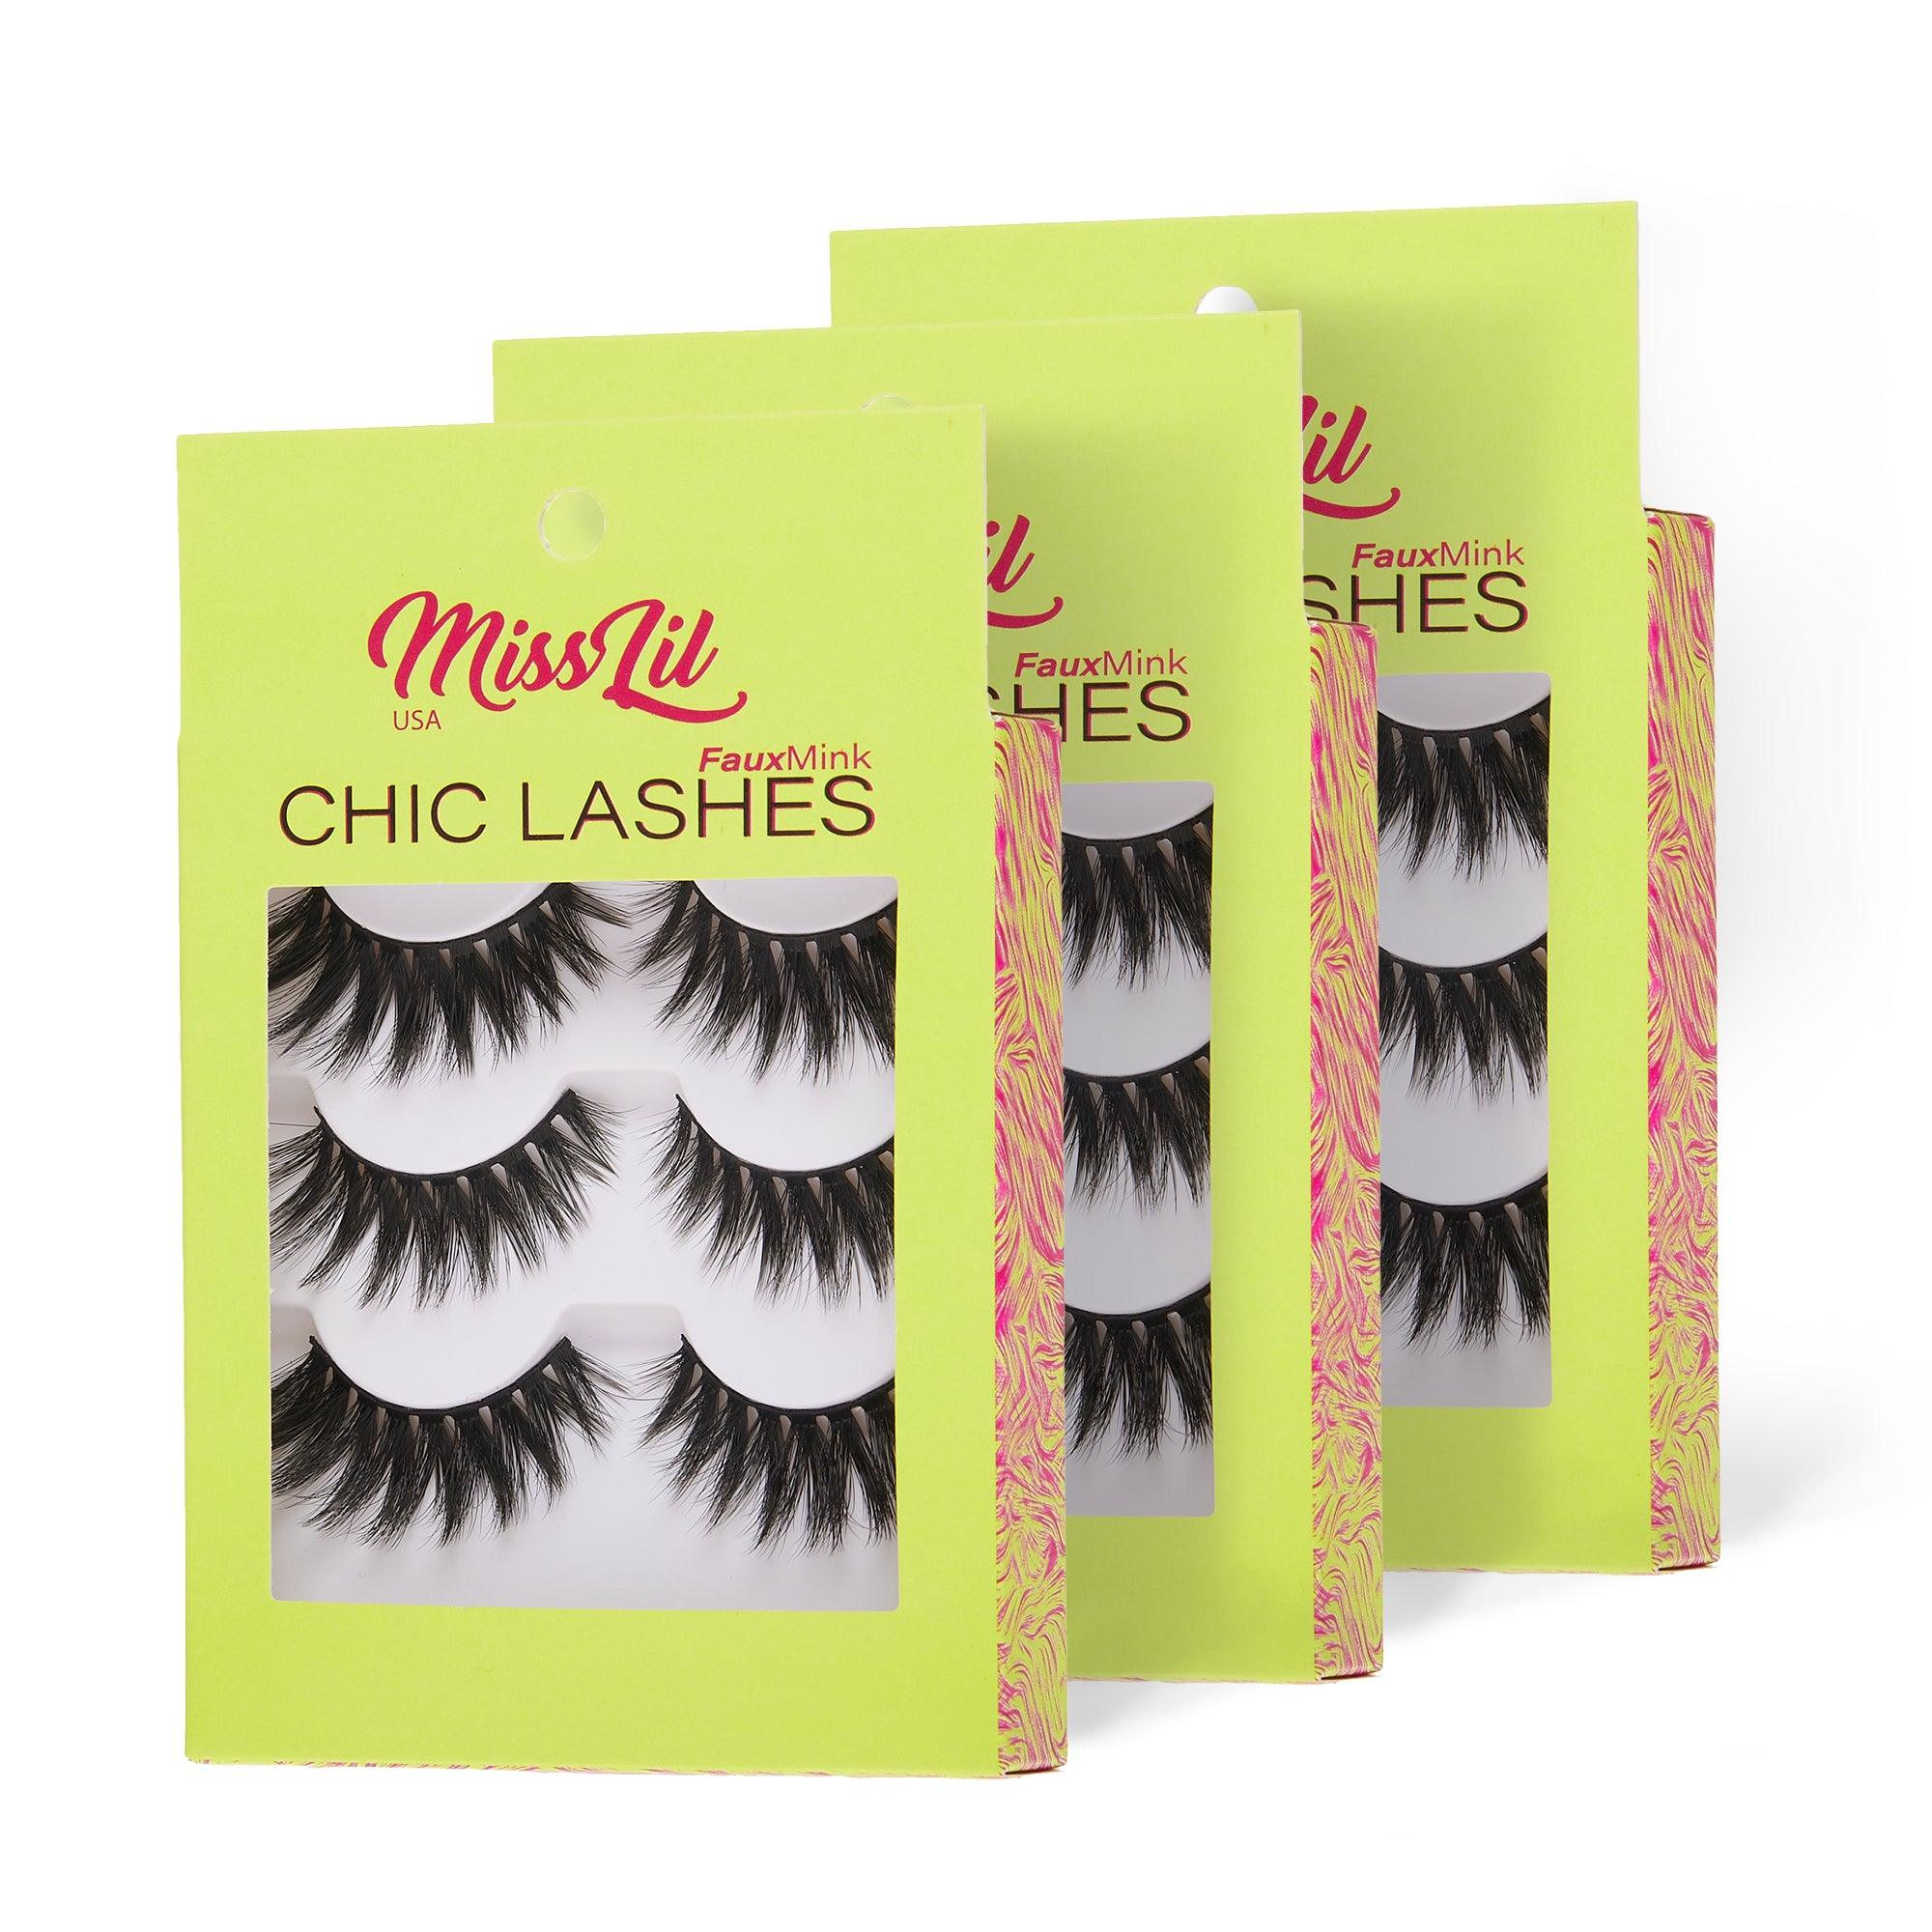 3-Pairs Lashes-Chic Lashes Collection #25 (Pack of 12 - Miss Lil USA Wholesale